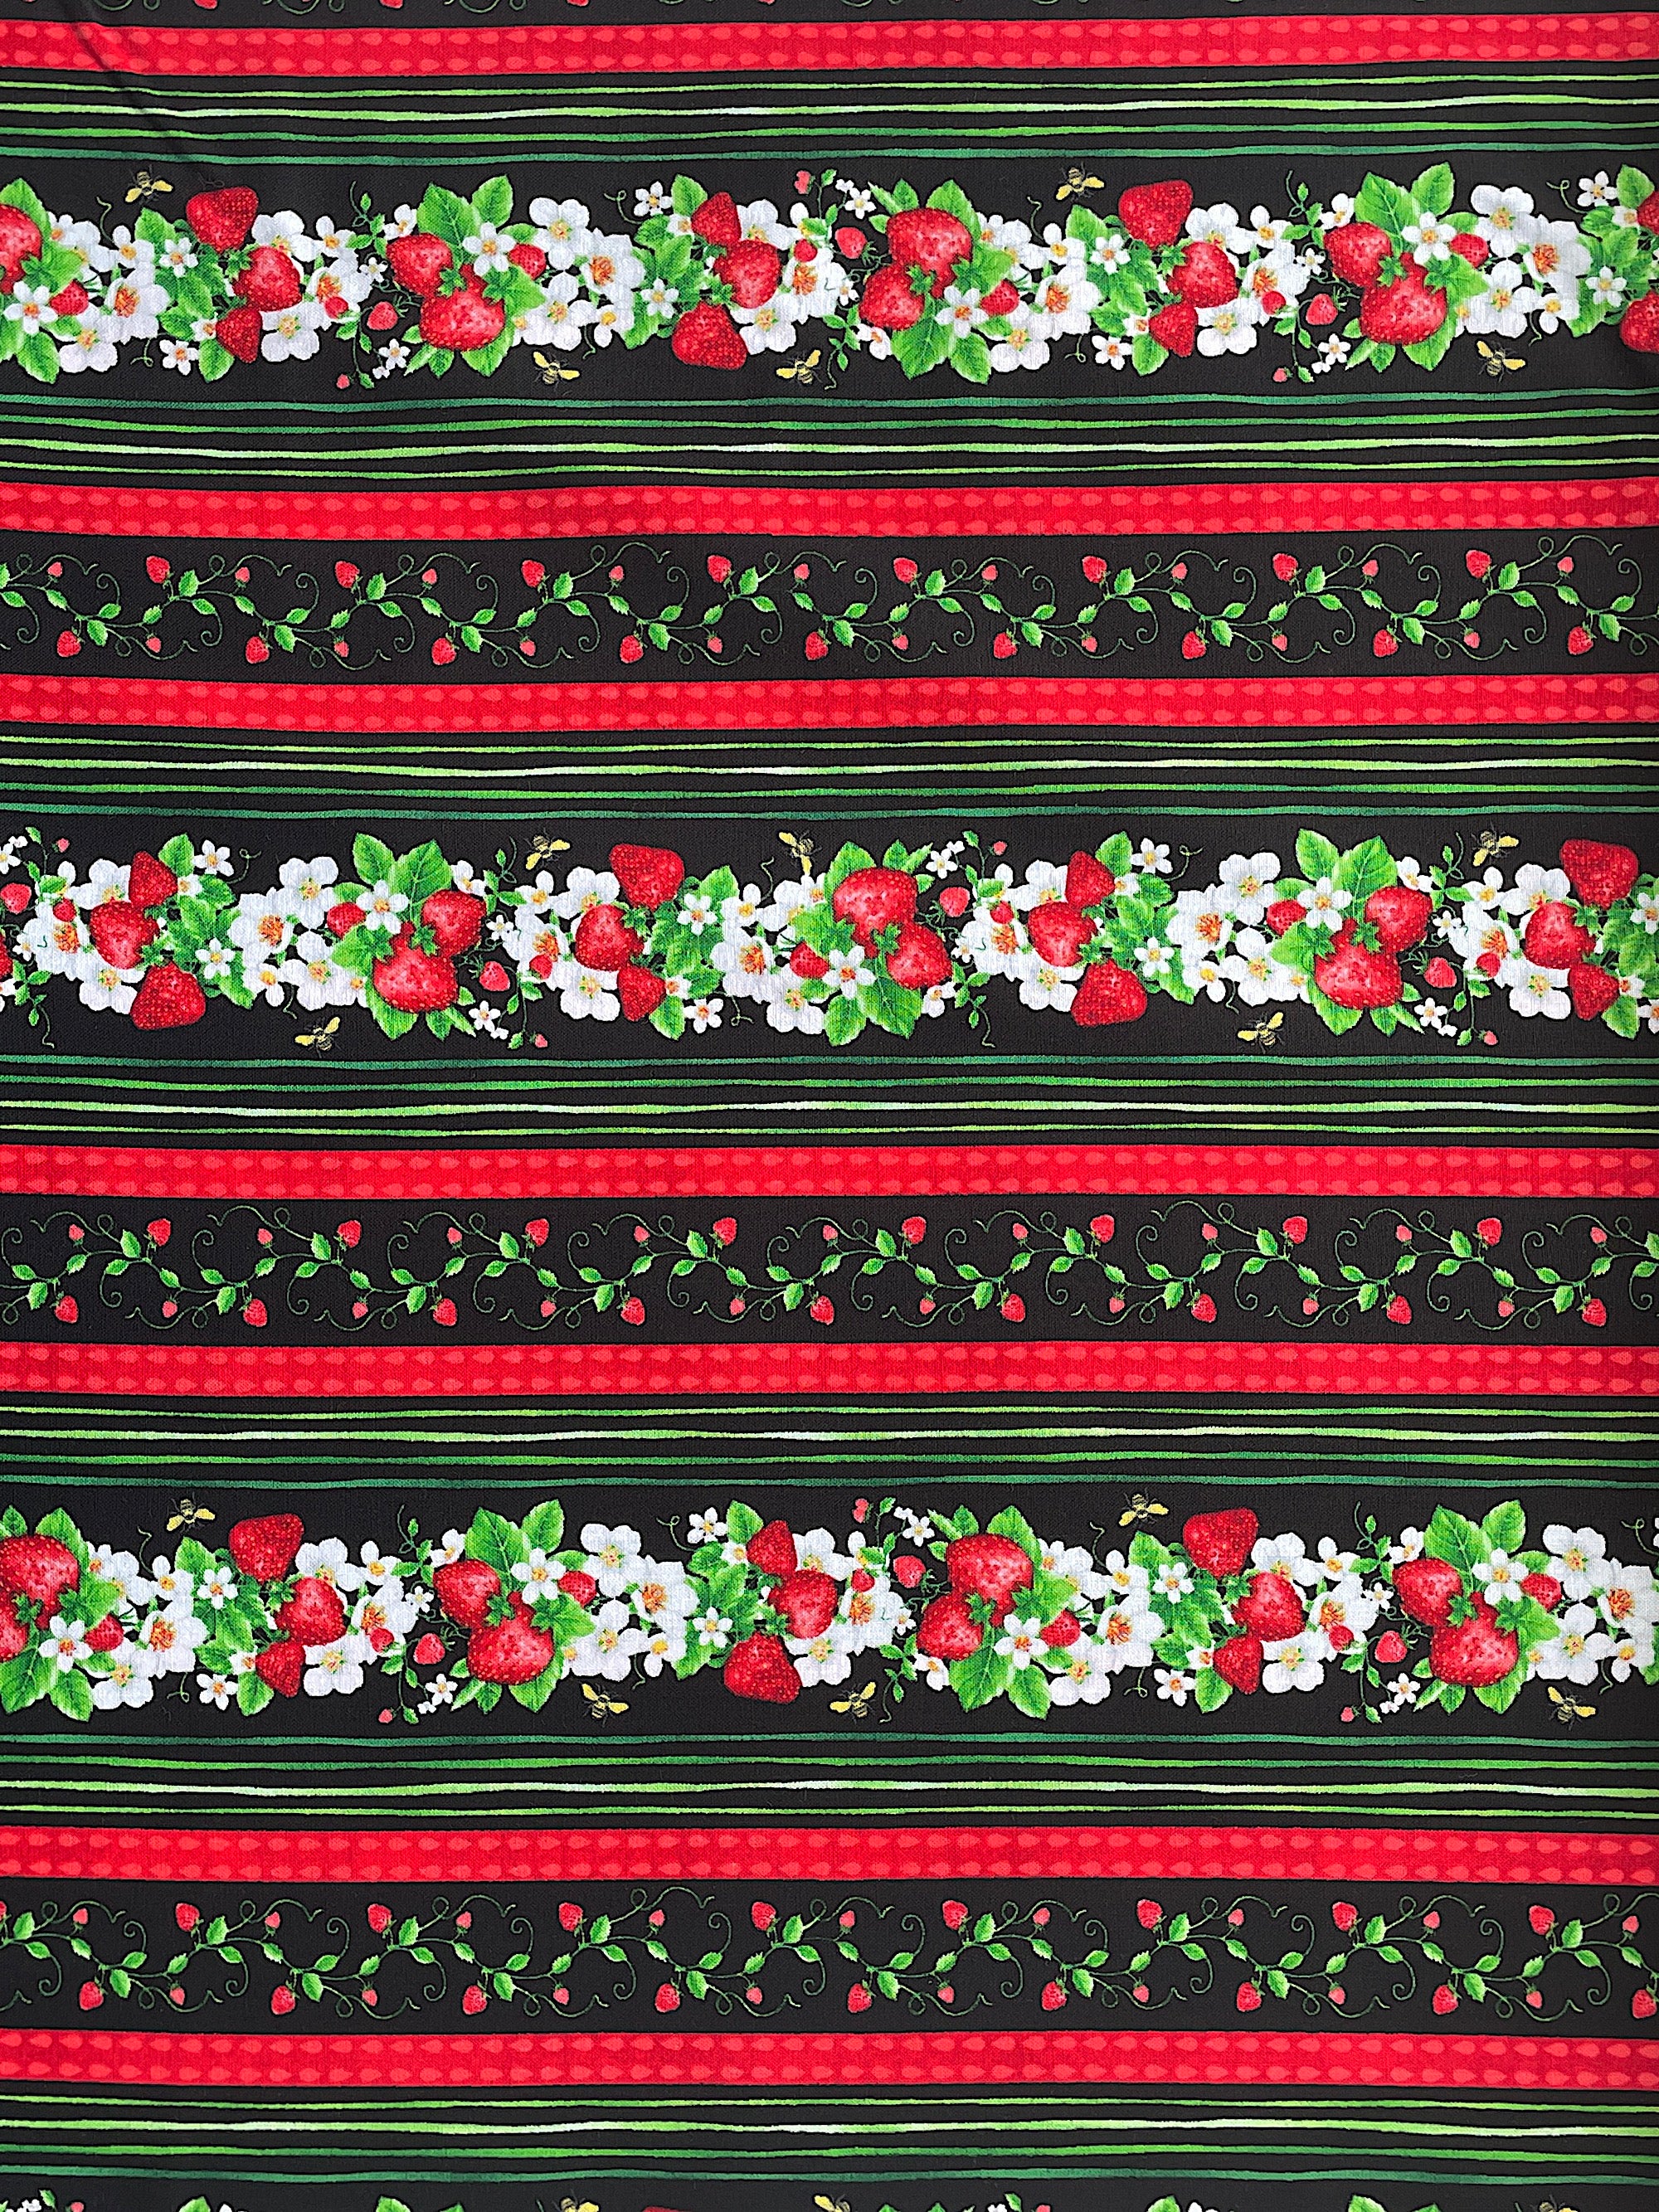 Black cotton fabric covered with rows of  strawberries, flowers and leaves.  